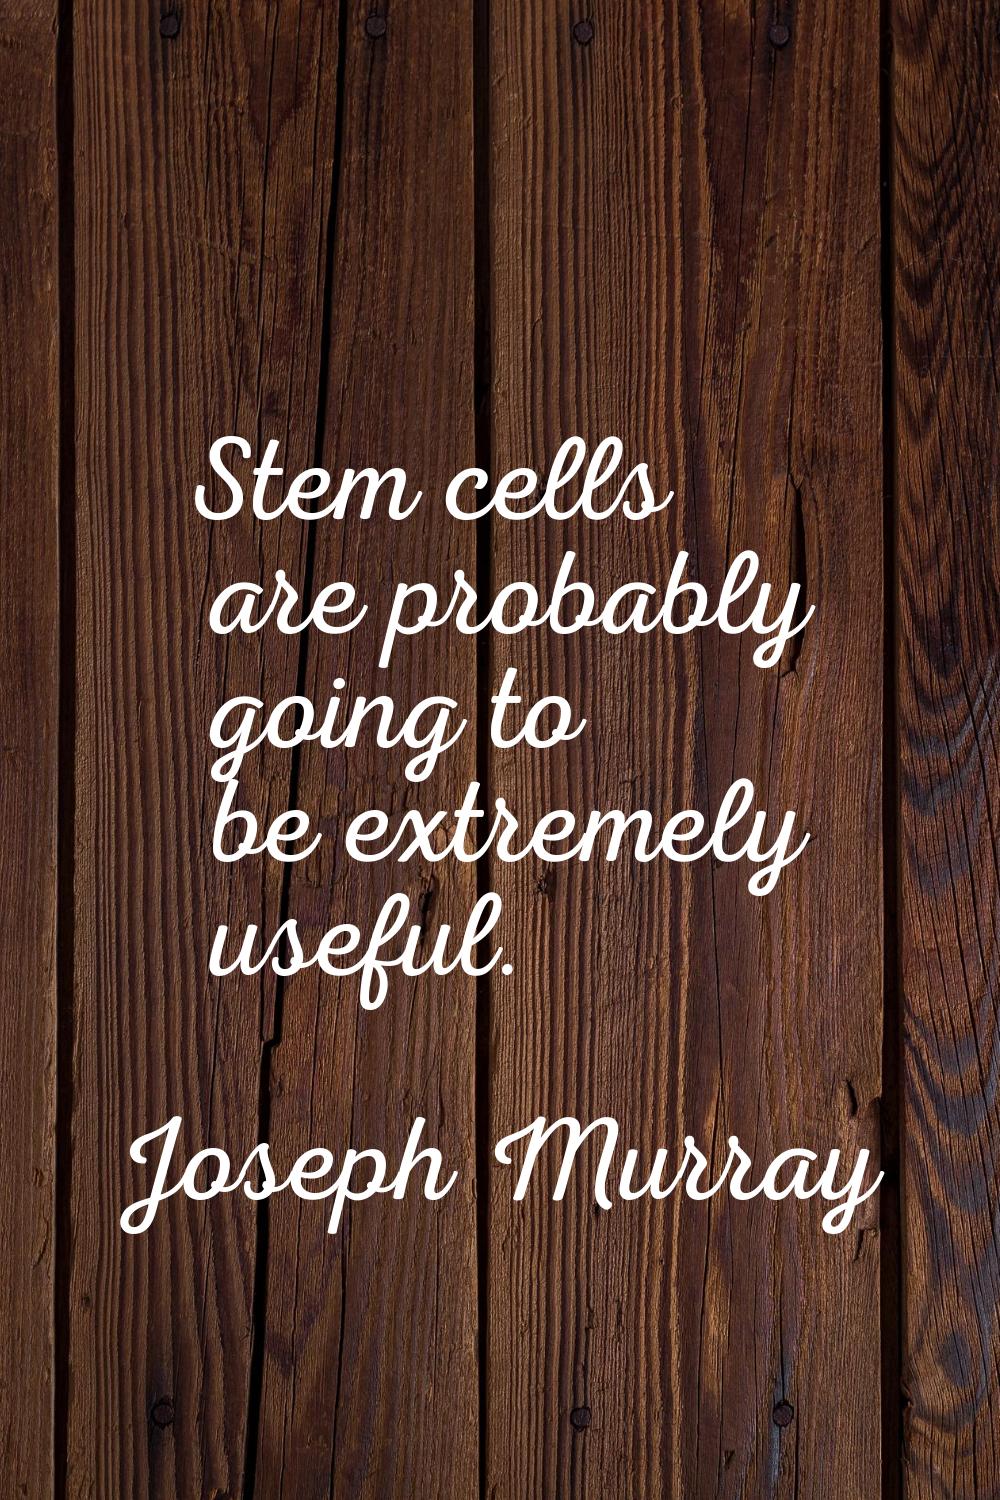 Stem cells are probably going to be extremely useful.